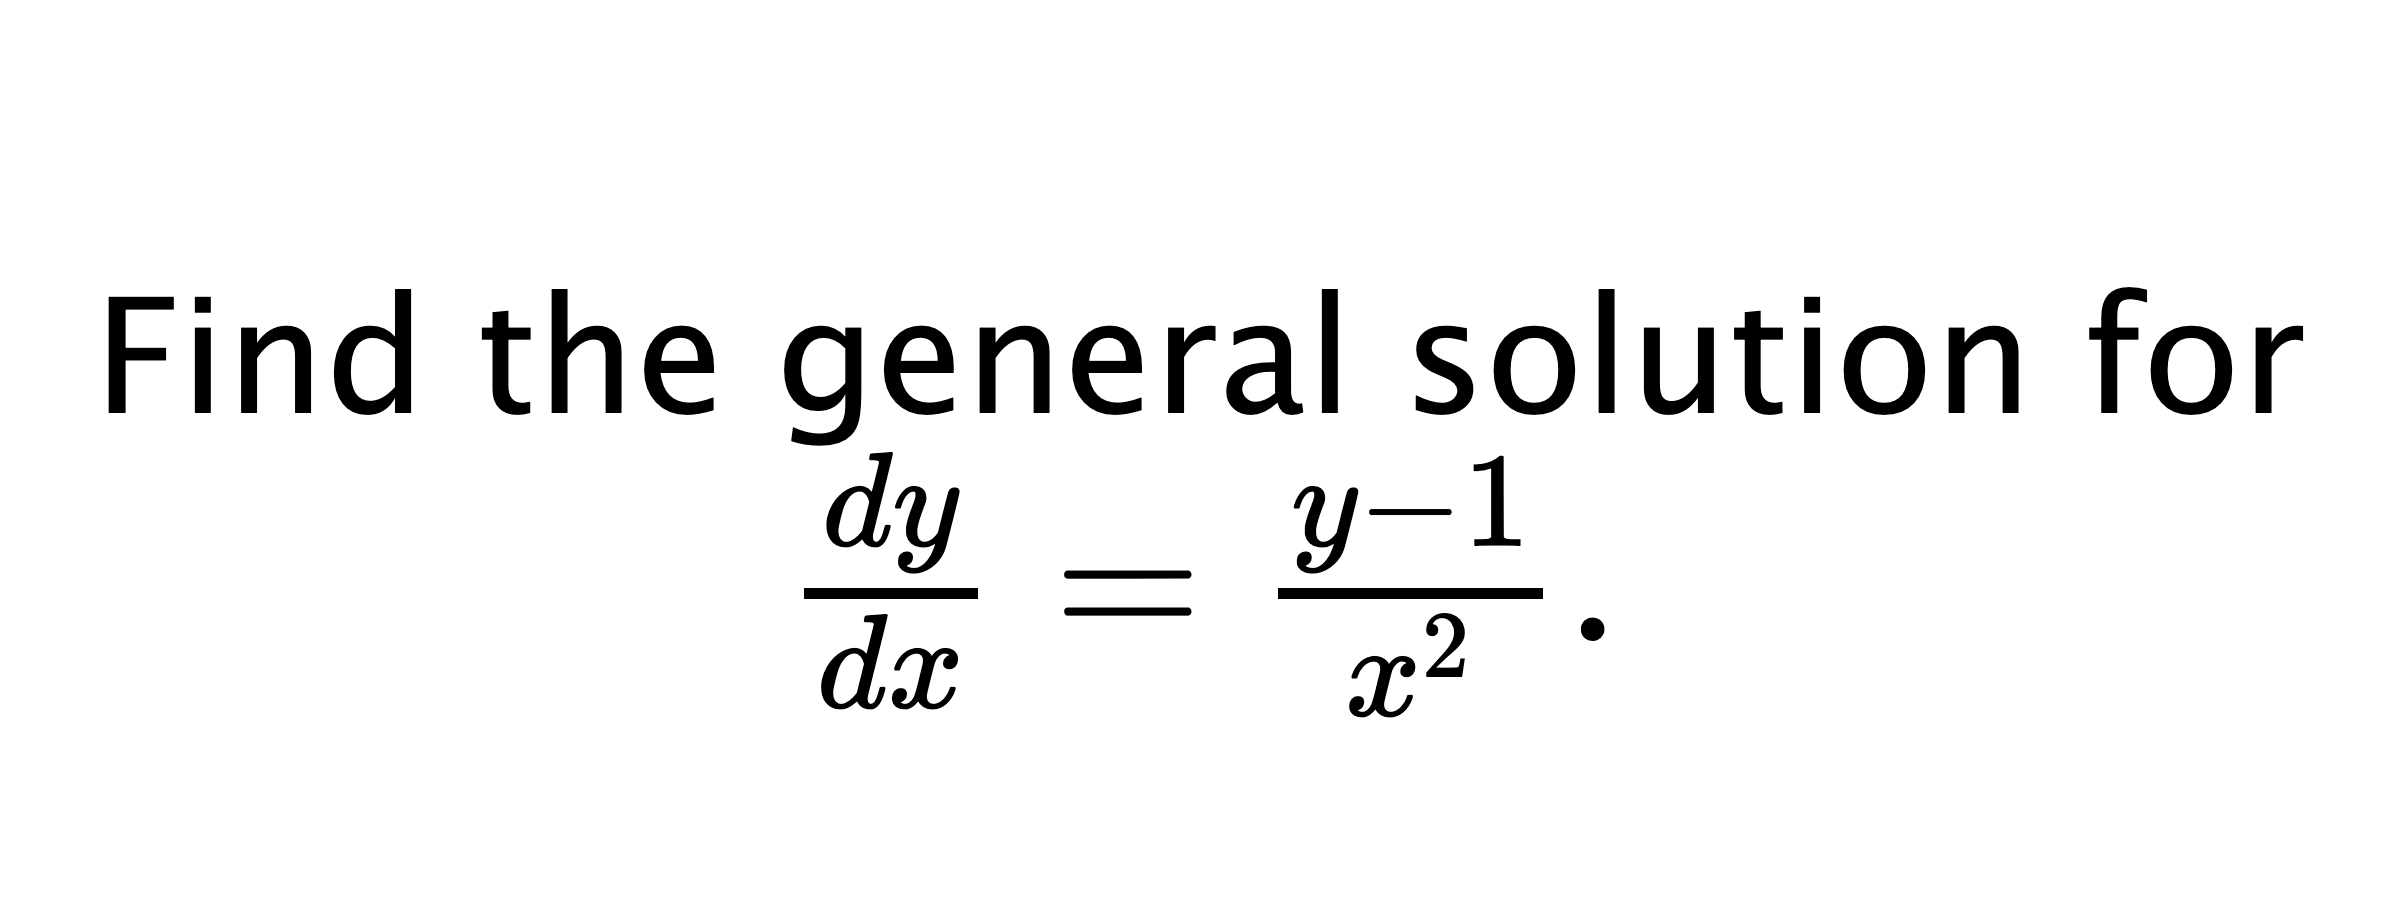  Find the general solution for $ \frac{dy}{dx}=\frac{y-1}{x^{2}}. $